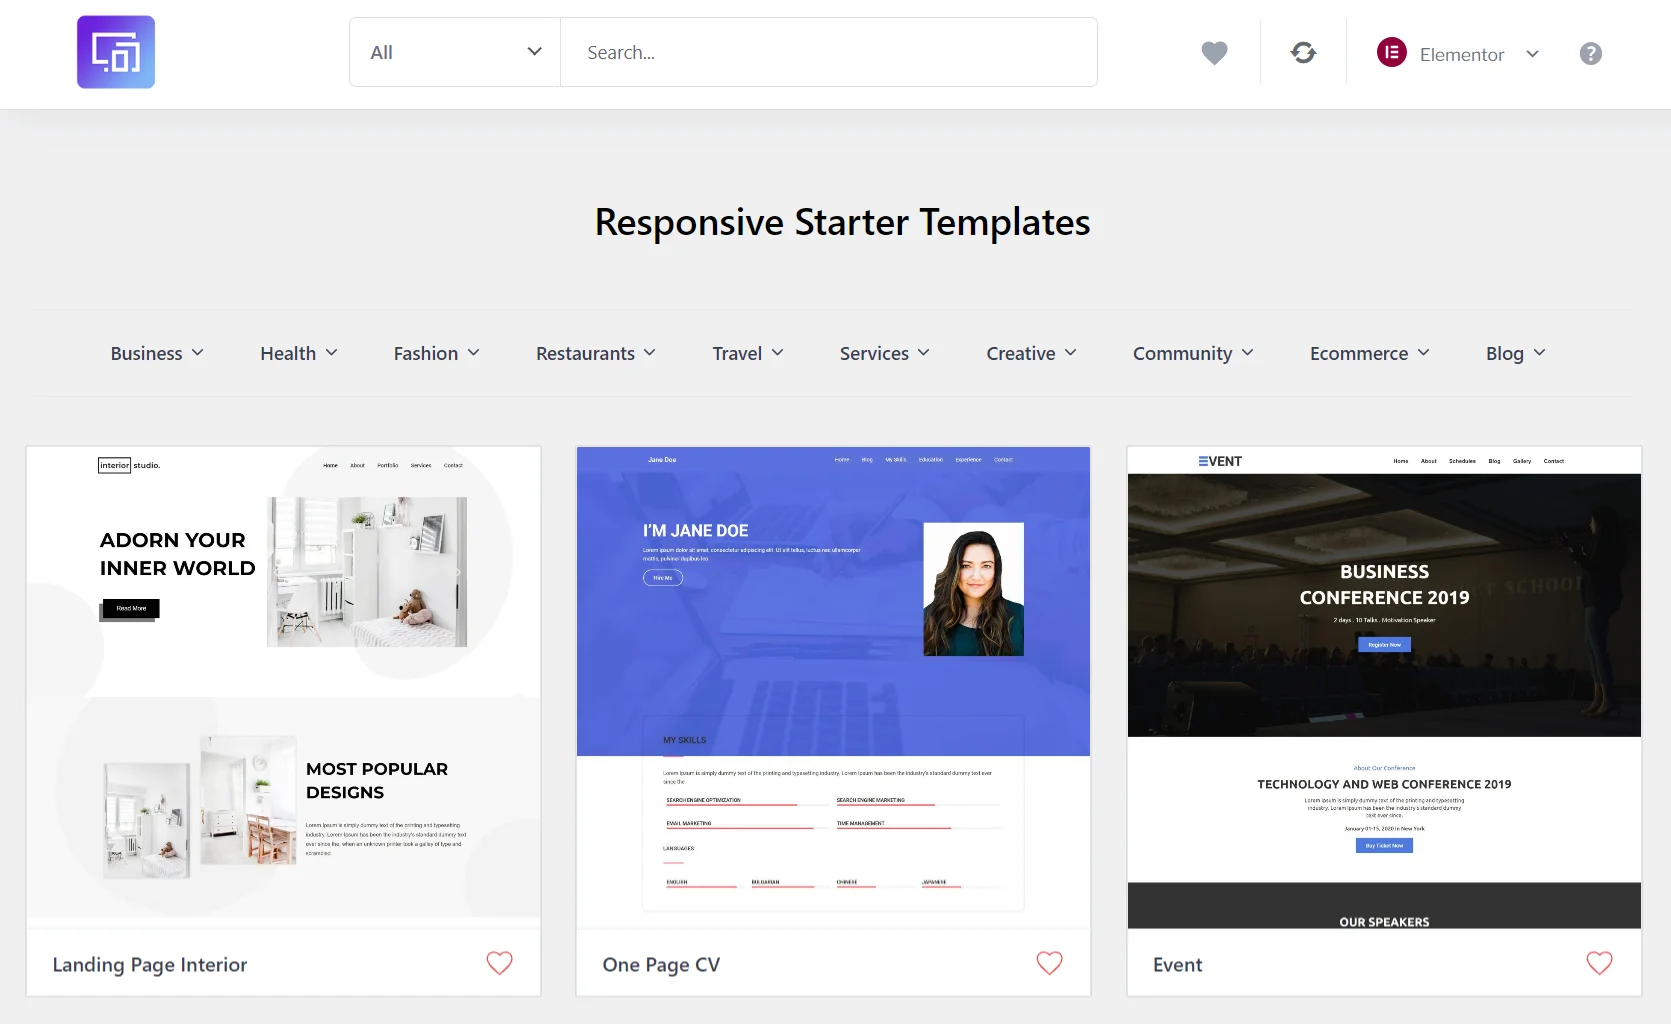 Library of responsive Starter Templates